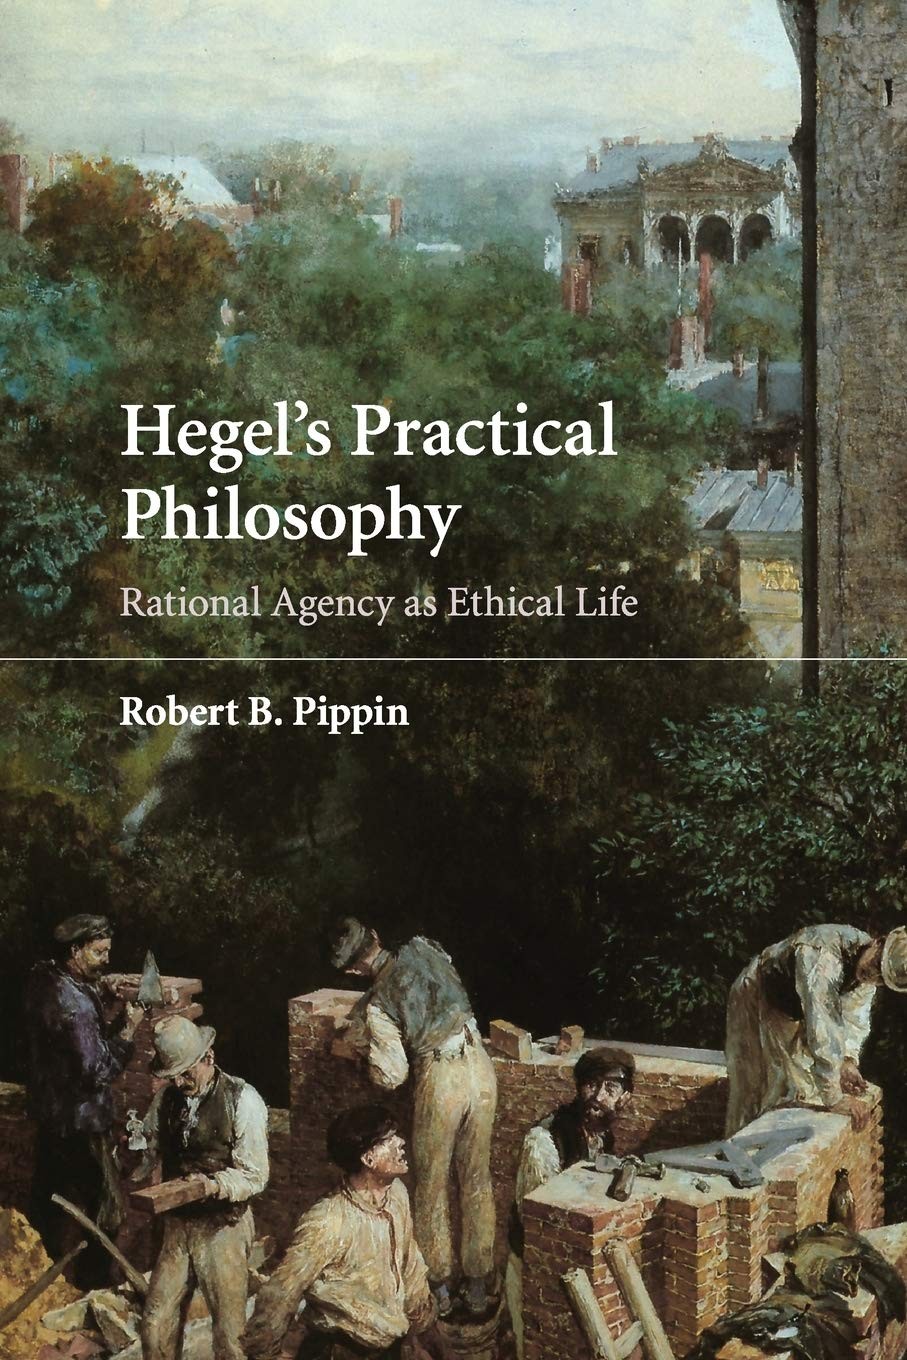 Hegel's Practical Philosophy: Rational Agency as Ethical Life